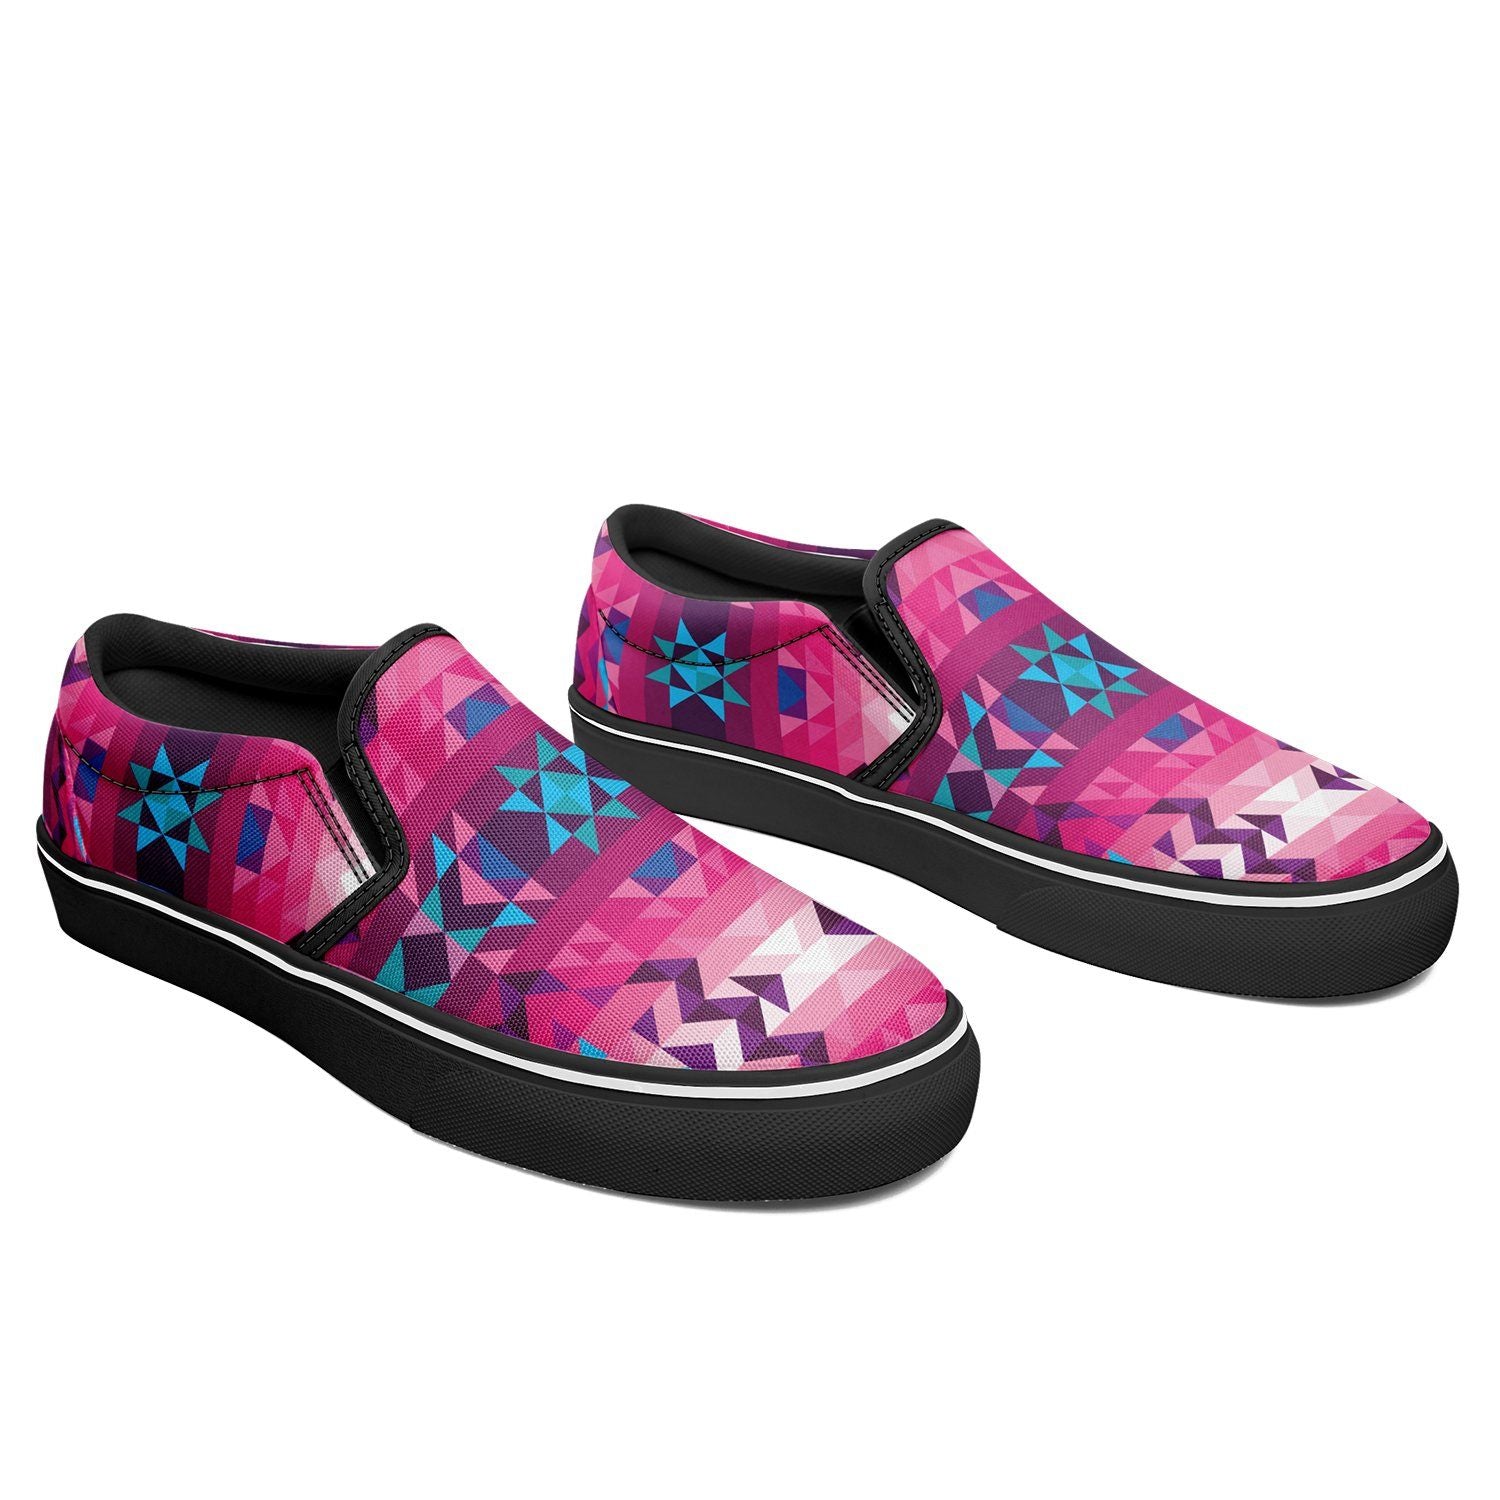 Bright Wave Otoyimm Canvas Slip On Shoes otoyimm Herman 